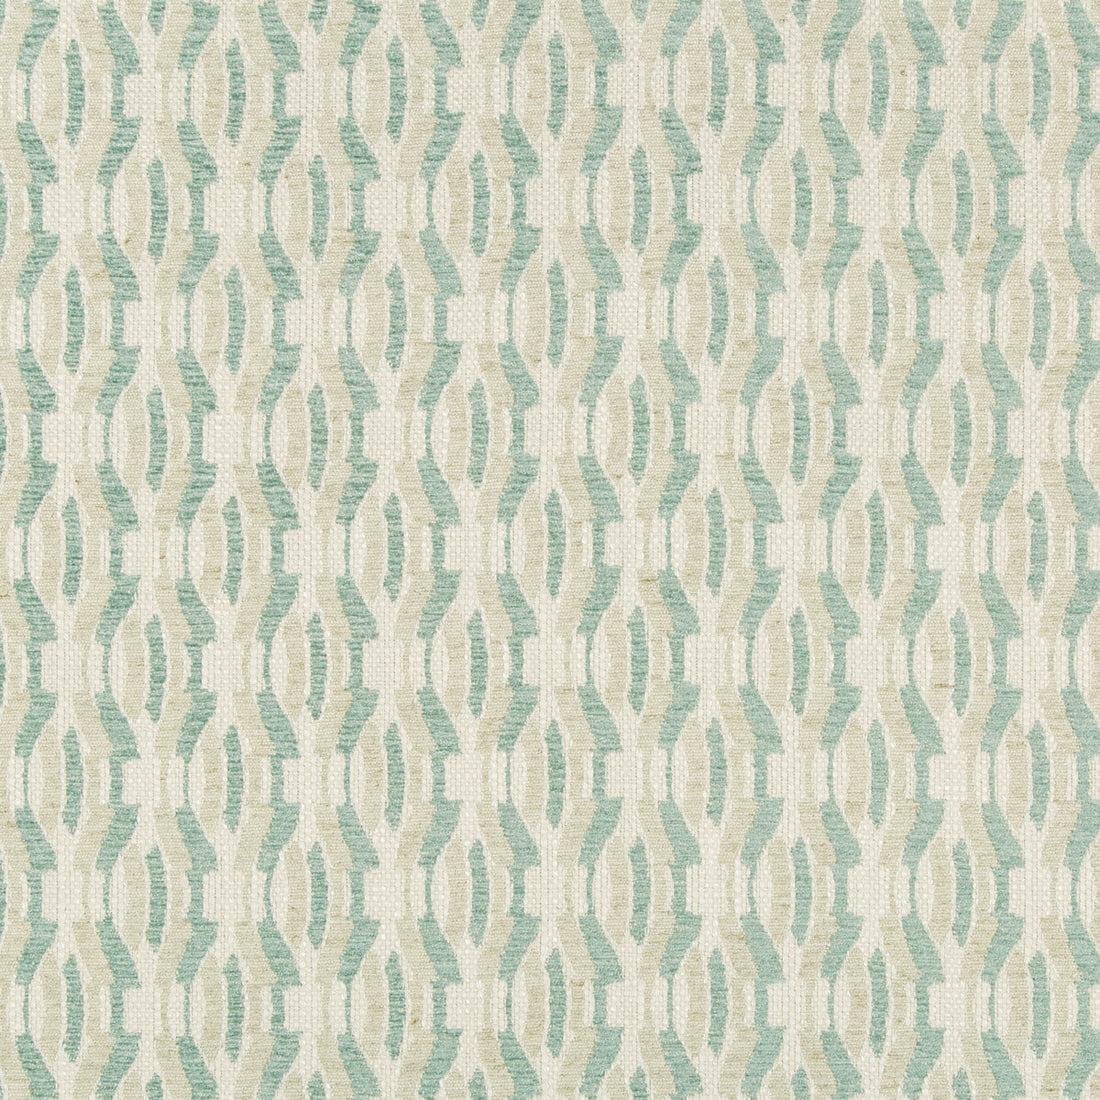 Agate Weave fabric in aqua color - pattern GWF-3748.13.0 - by Lee Jofa Modern in the Gems collection